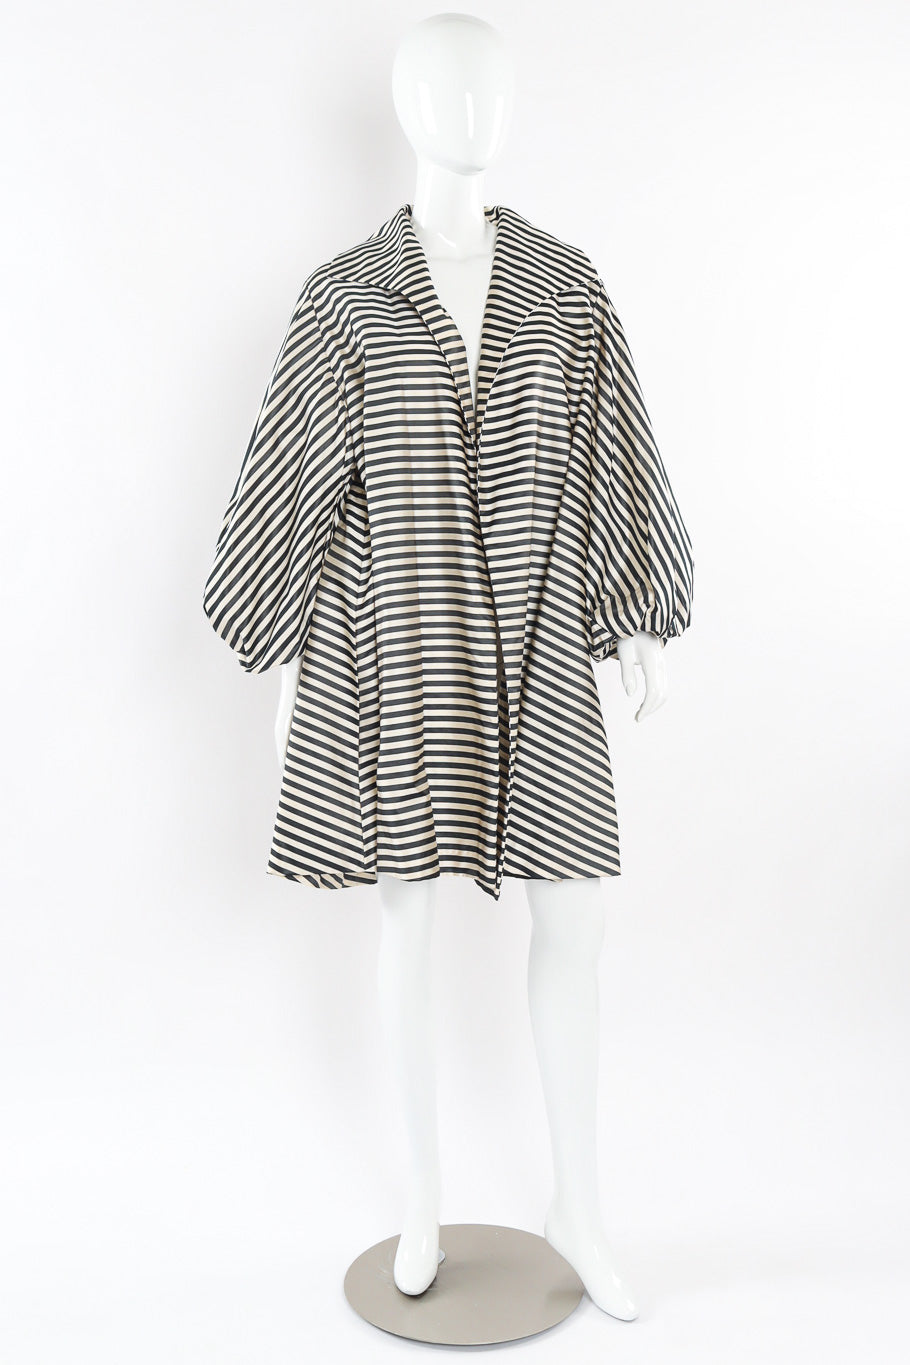 Oversized striped swing coat by Carolyne Roehm Front View @recessla